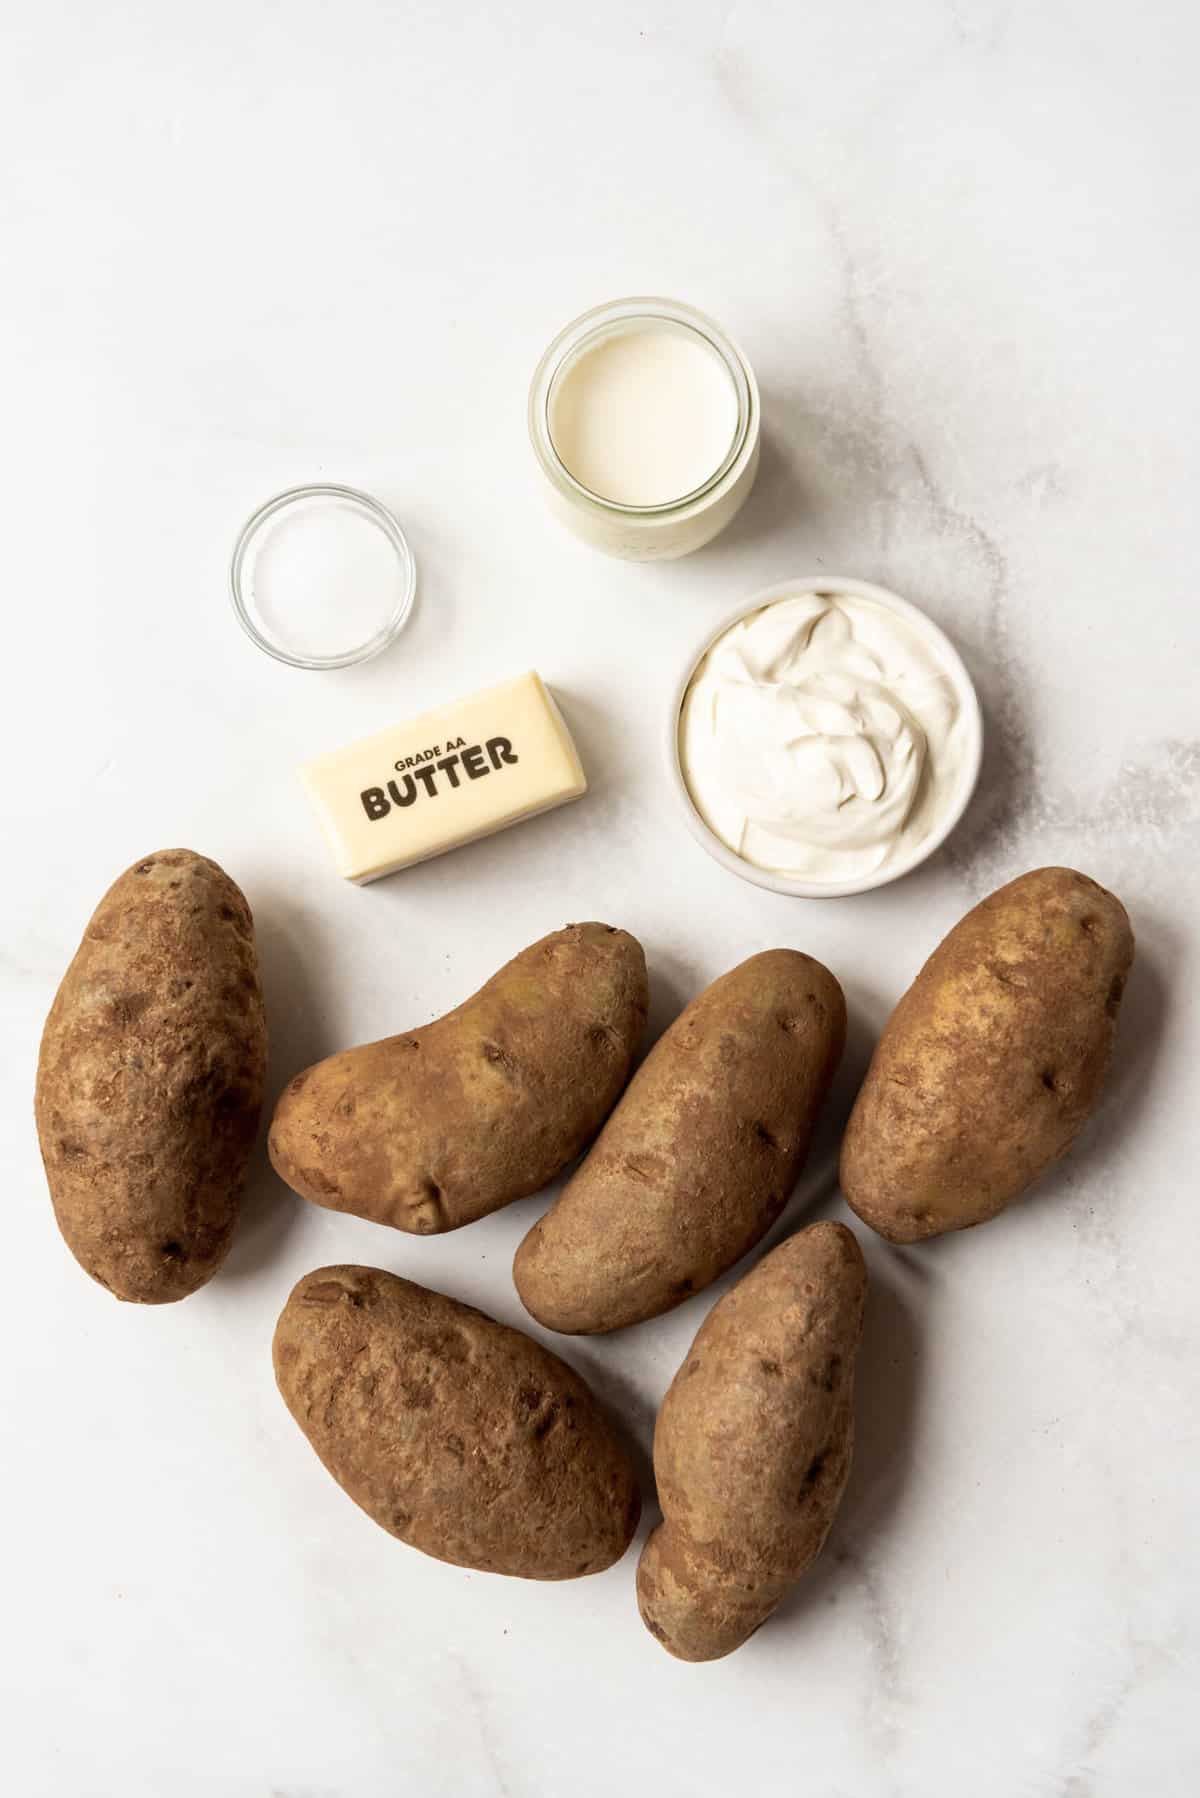 Top view of ingredients needed to make instant pot mashed potatoes. 